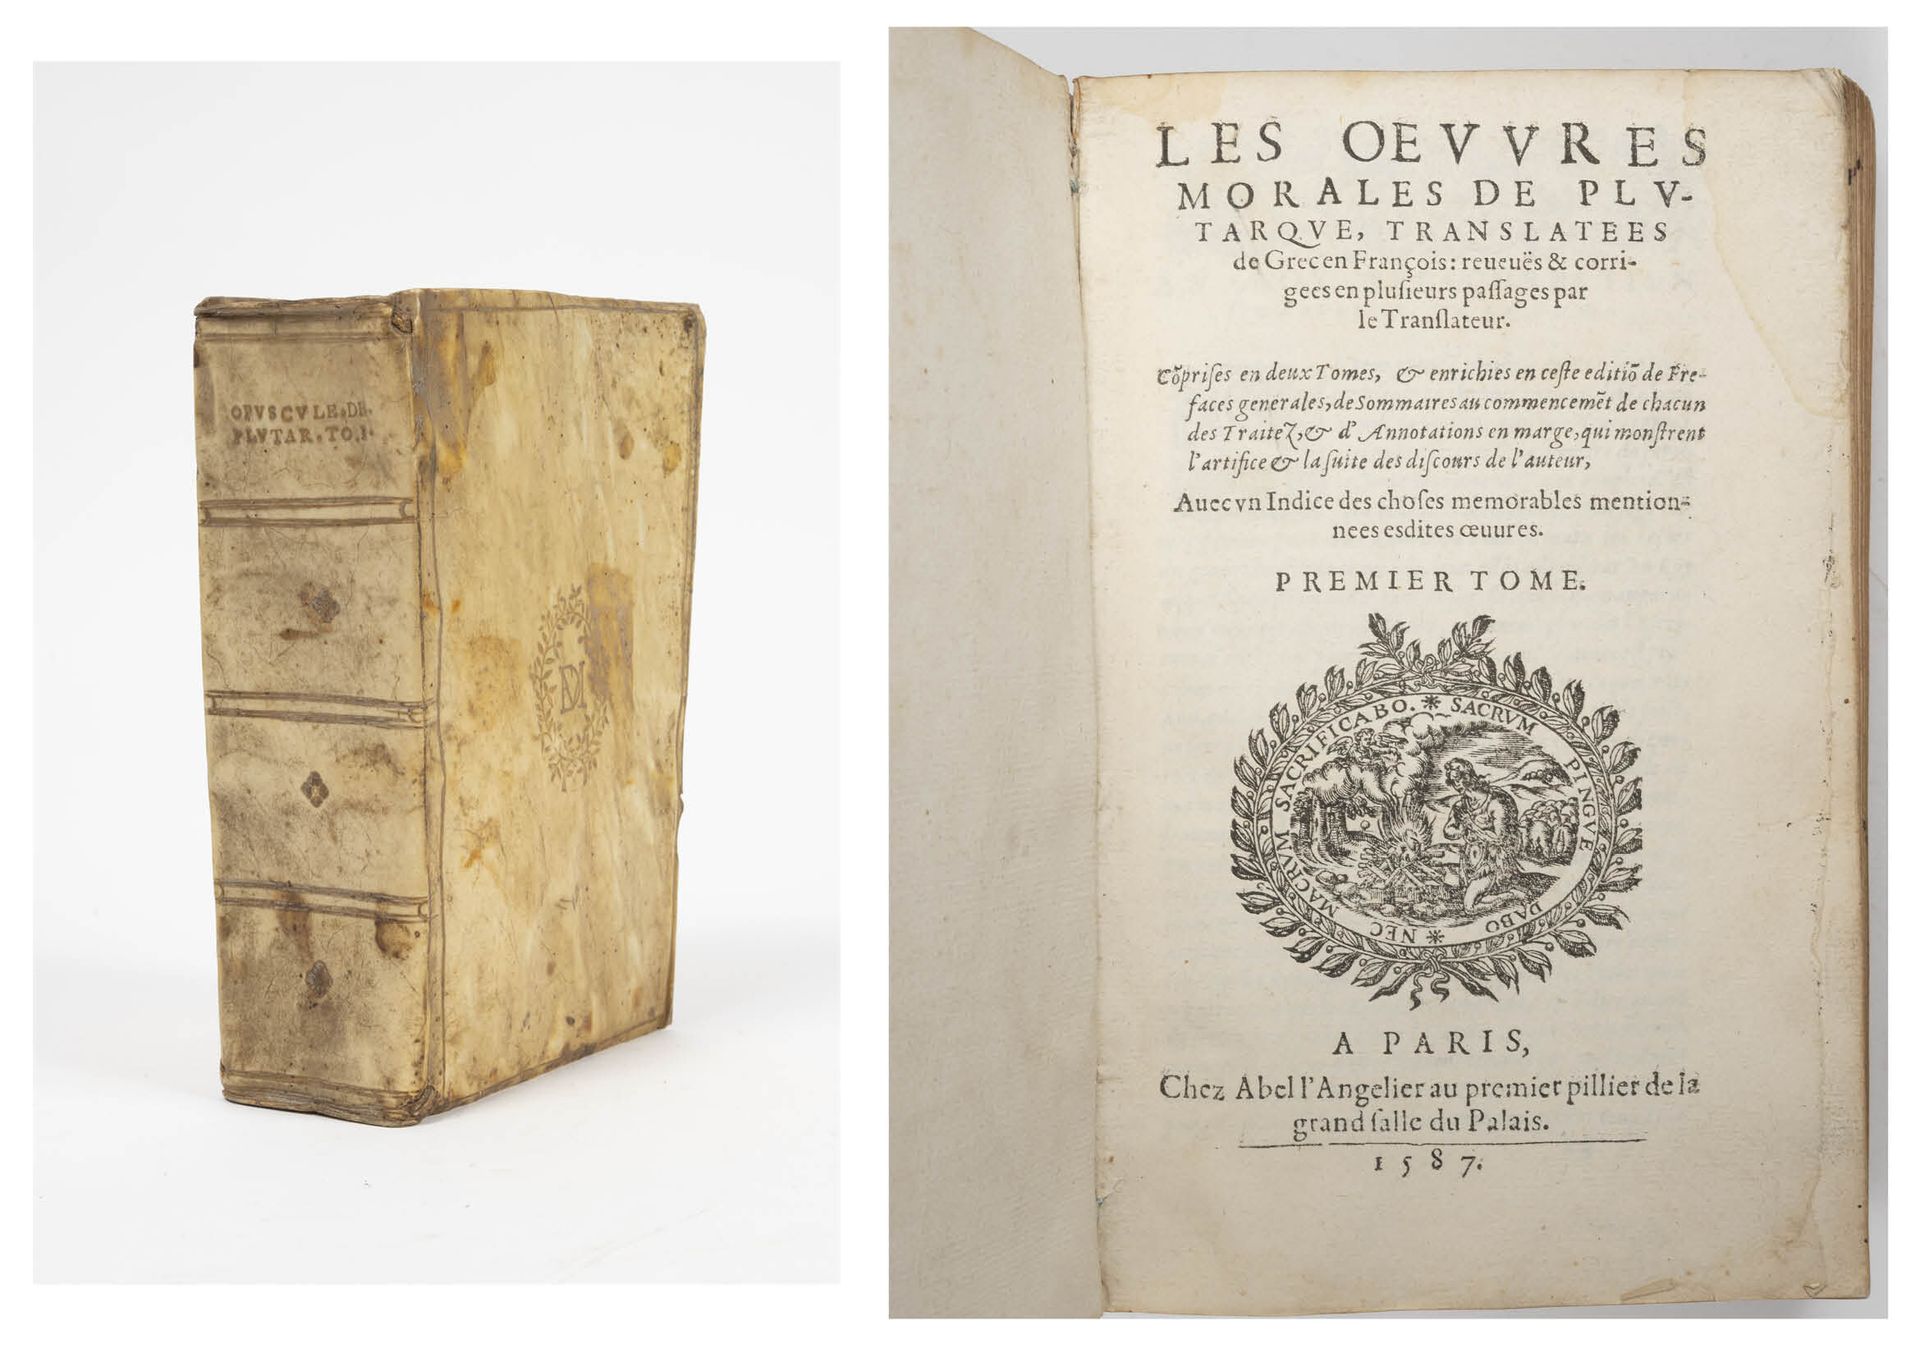 Null The moral works of Plutarch. 

Tome one. 

At Abel l'angelier, Paris, 1587.&hellip;